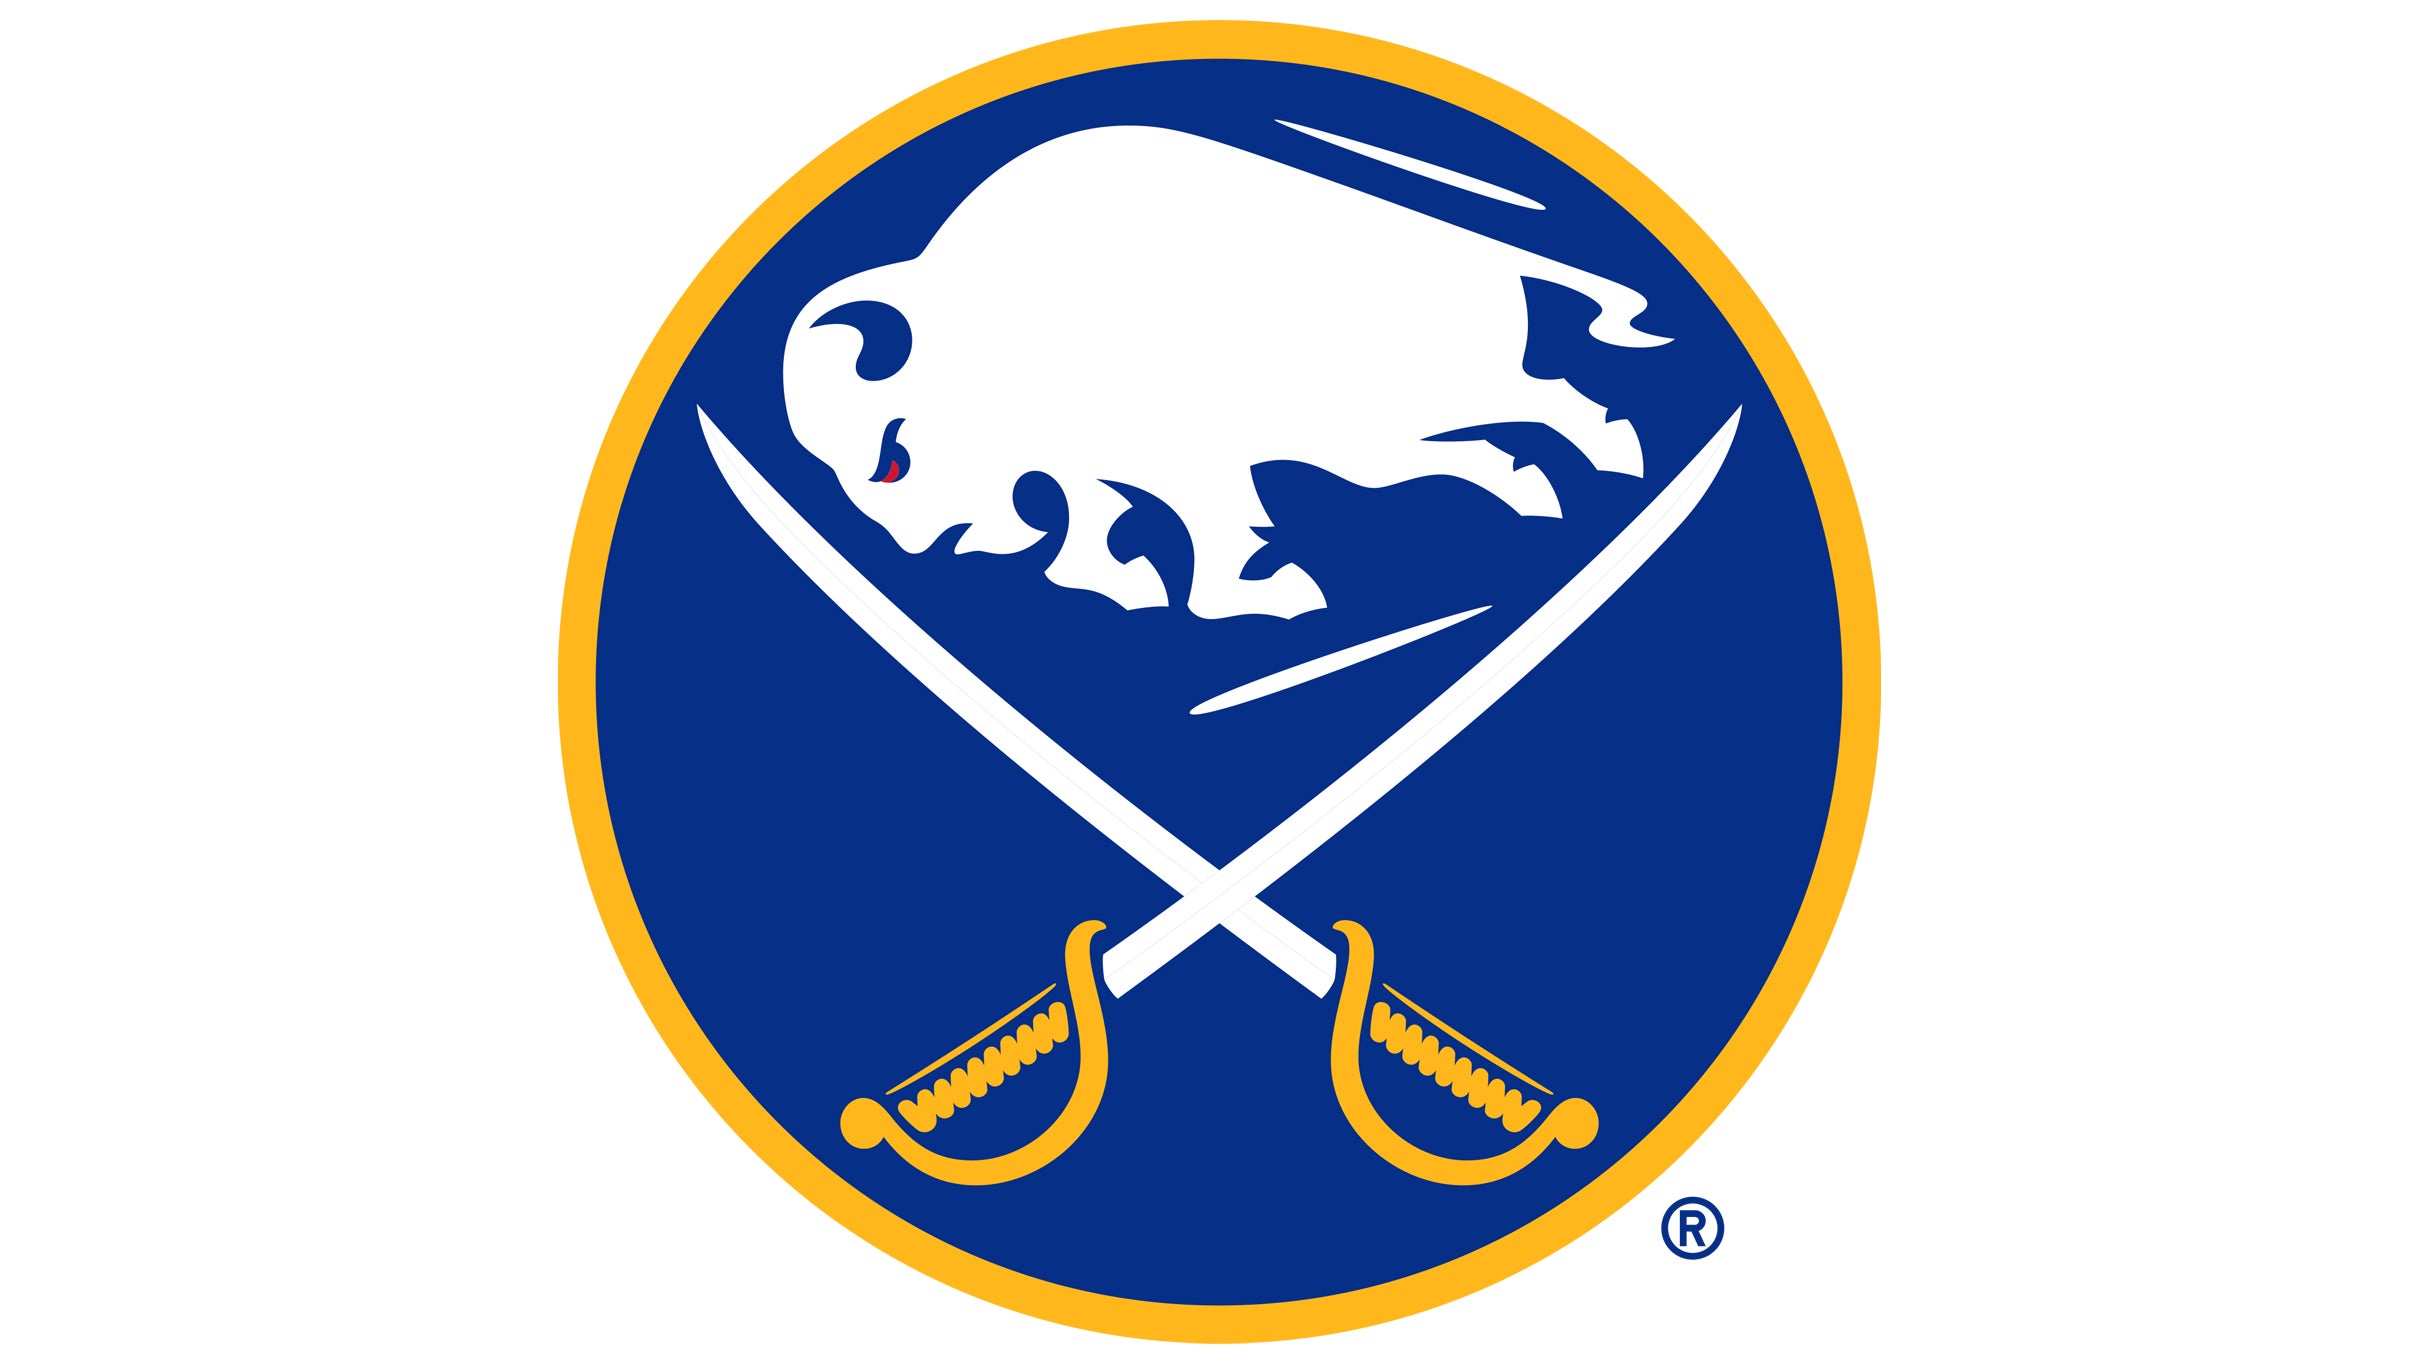 Buffalo Sabres vs. Florida Panthers in Buffalo promo photo for Resale presale offer code